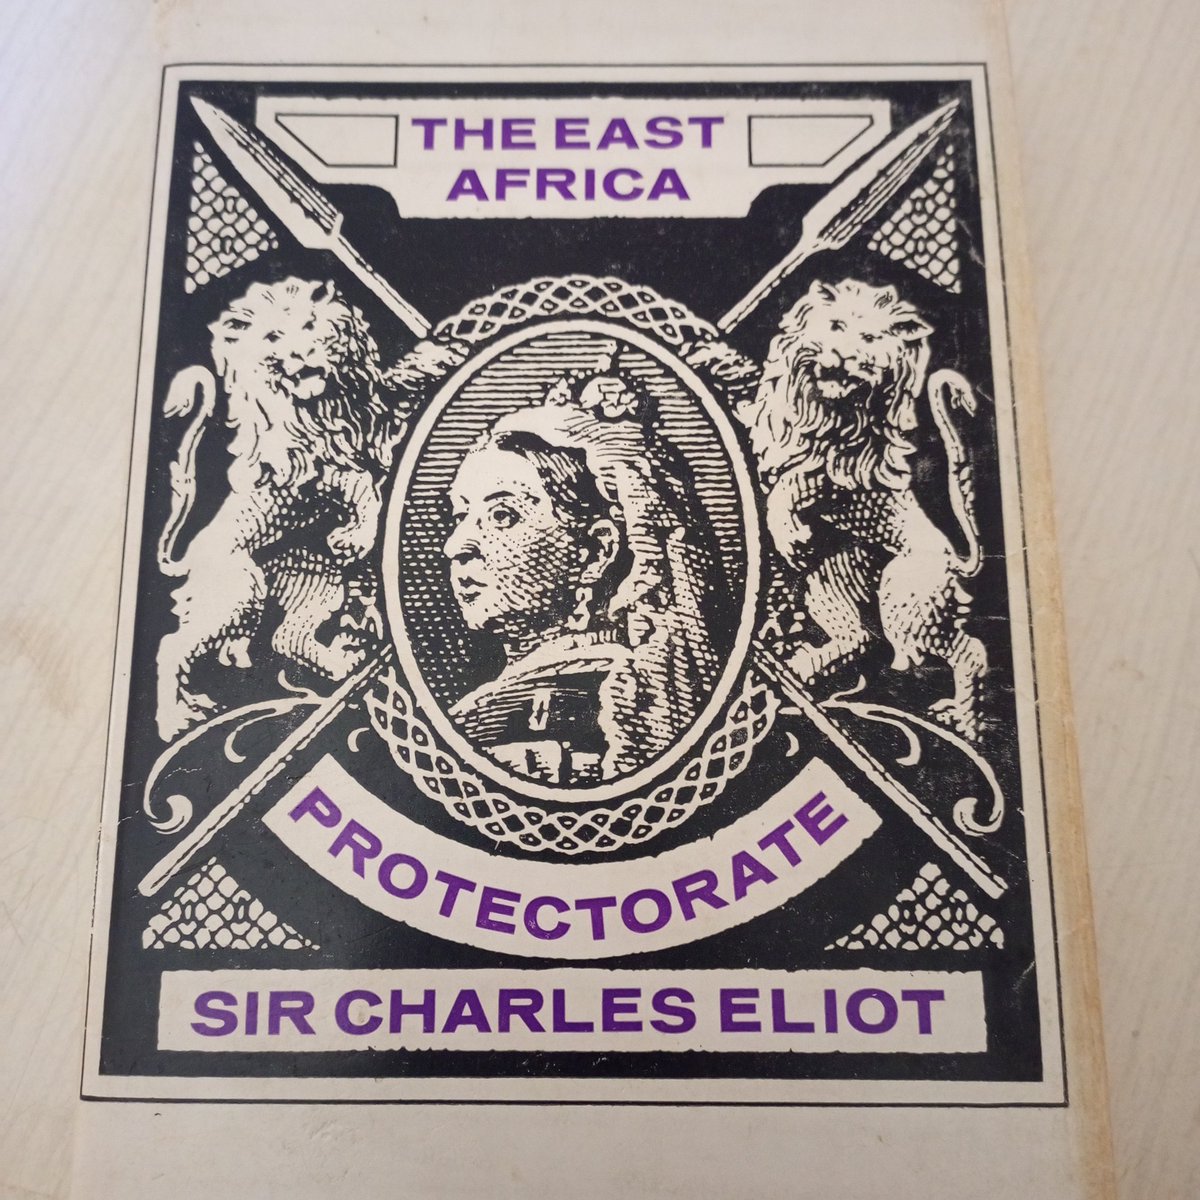 This 1905 book has a Duruma native tradition claim that they descended from the people of Kilwa, brought to Mombasa by Bwana Kigozi. Eliot suggests Kigozi could've been de Goez, a Portuguese General who defeated Kilwa's Sultan and deported him and his subjects to Mombasa in 1509.